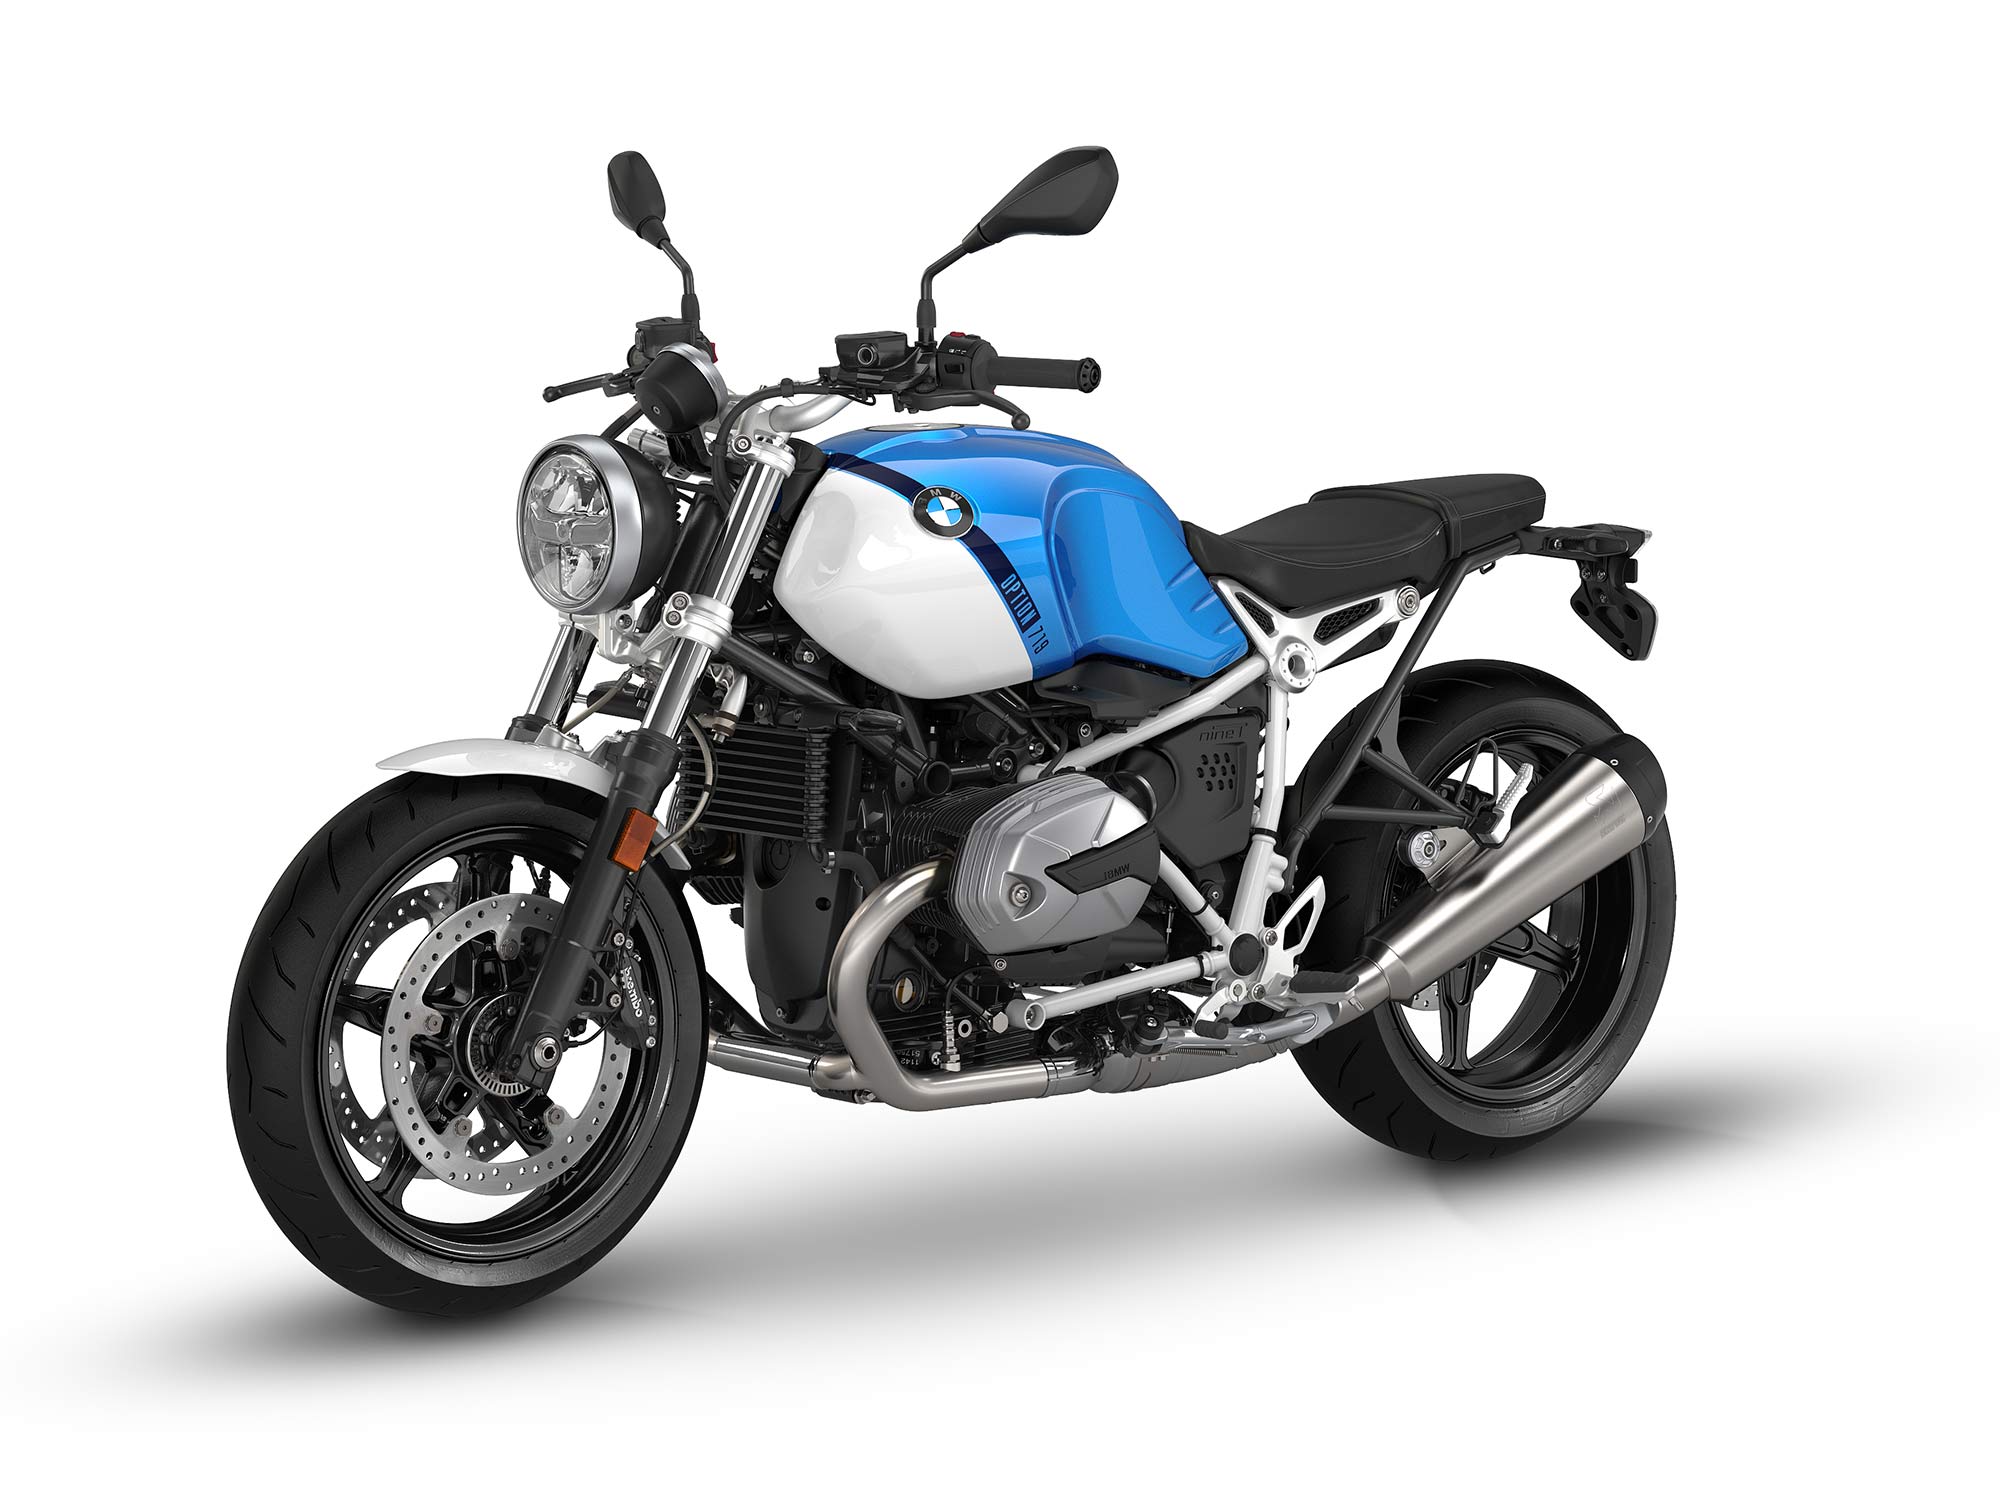 2022 BMW R nineT/Pure Buyer's Guide: Specs, Photos, Price